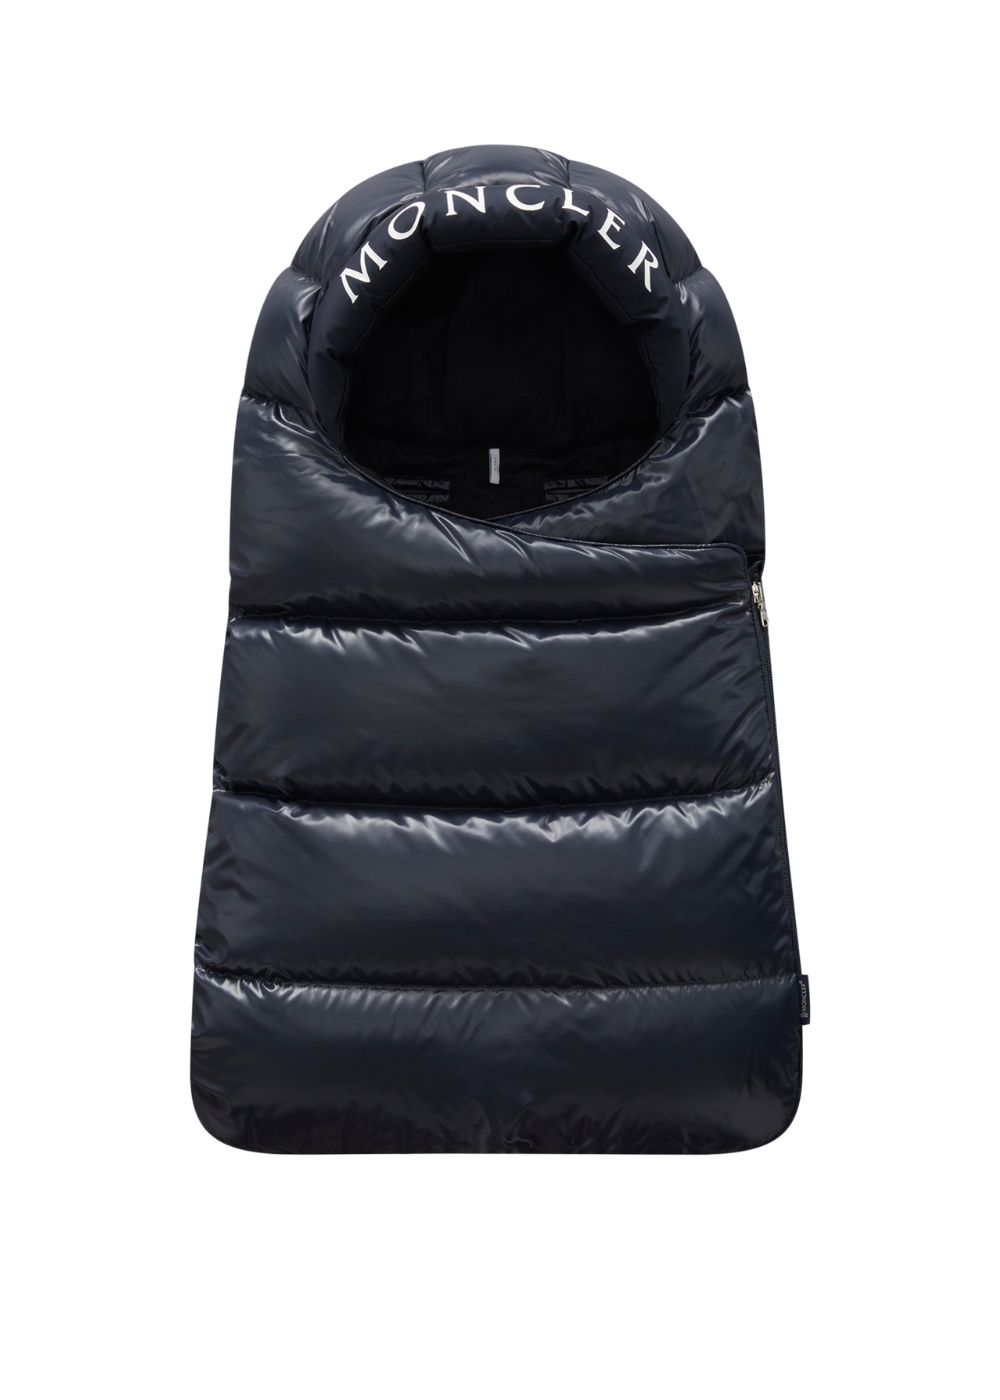 Featured image for “Moncler Sacco Neonato”